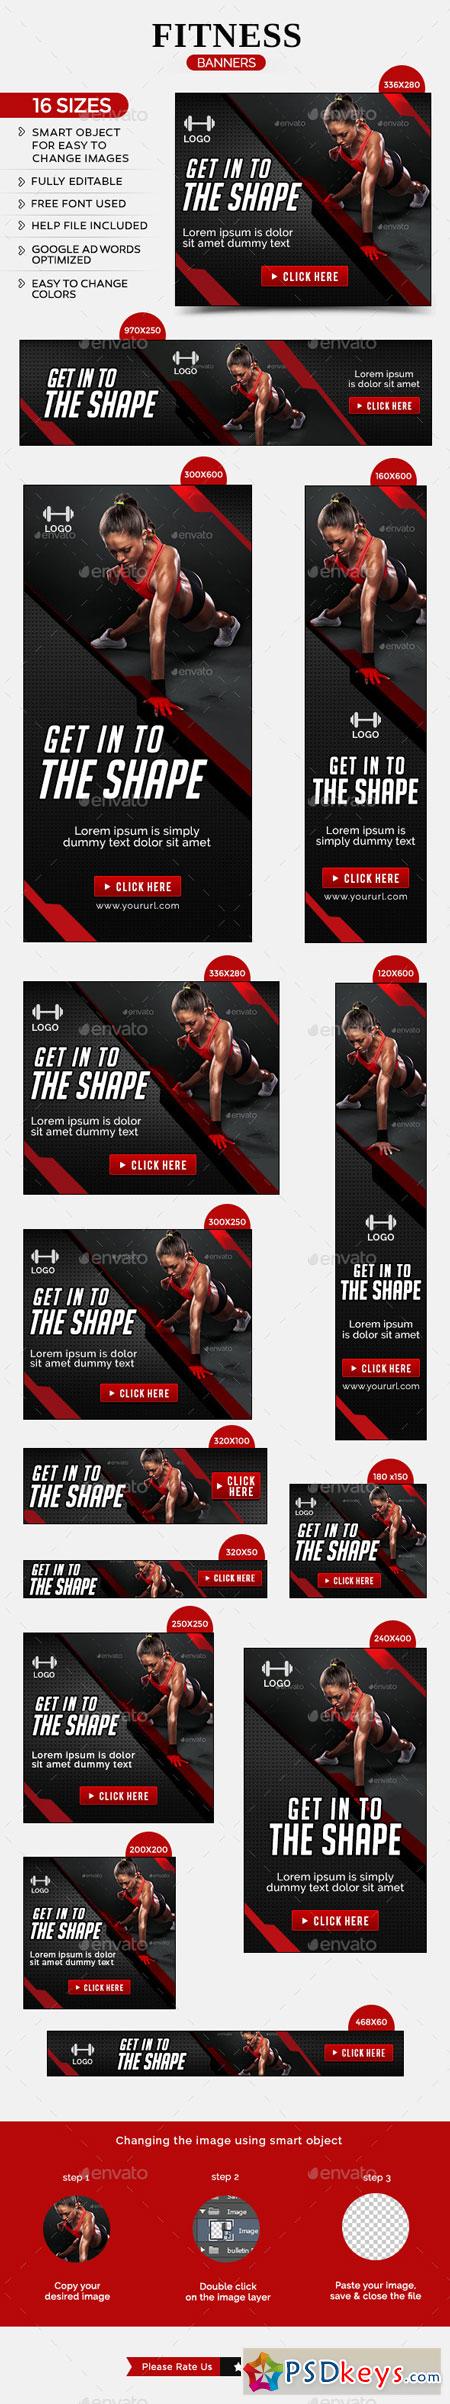 Fitness Banners 11068975